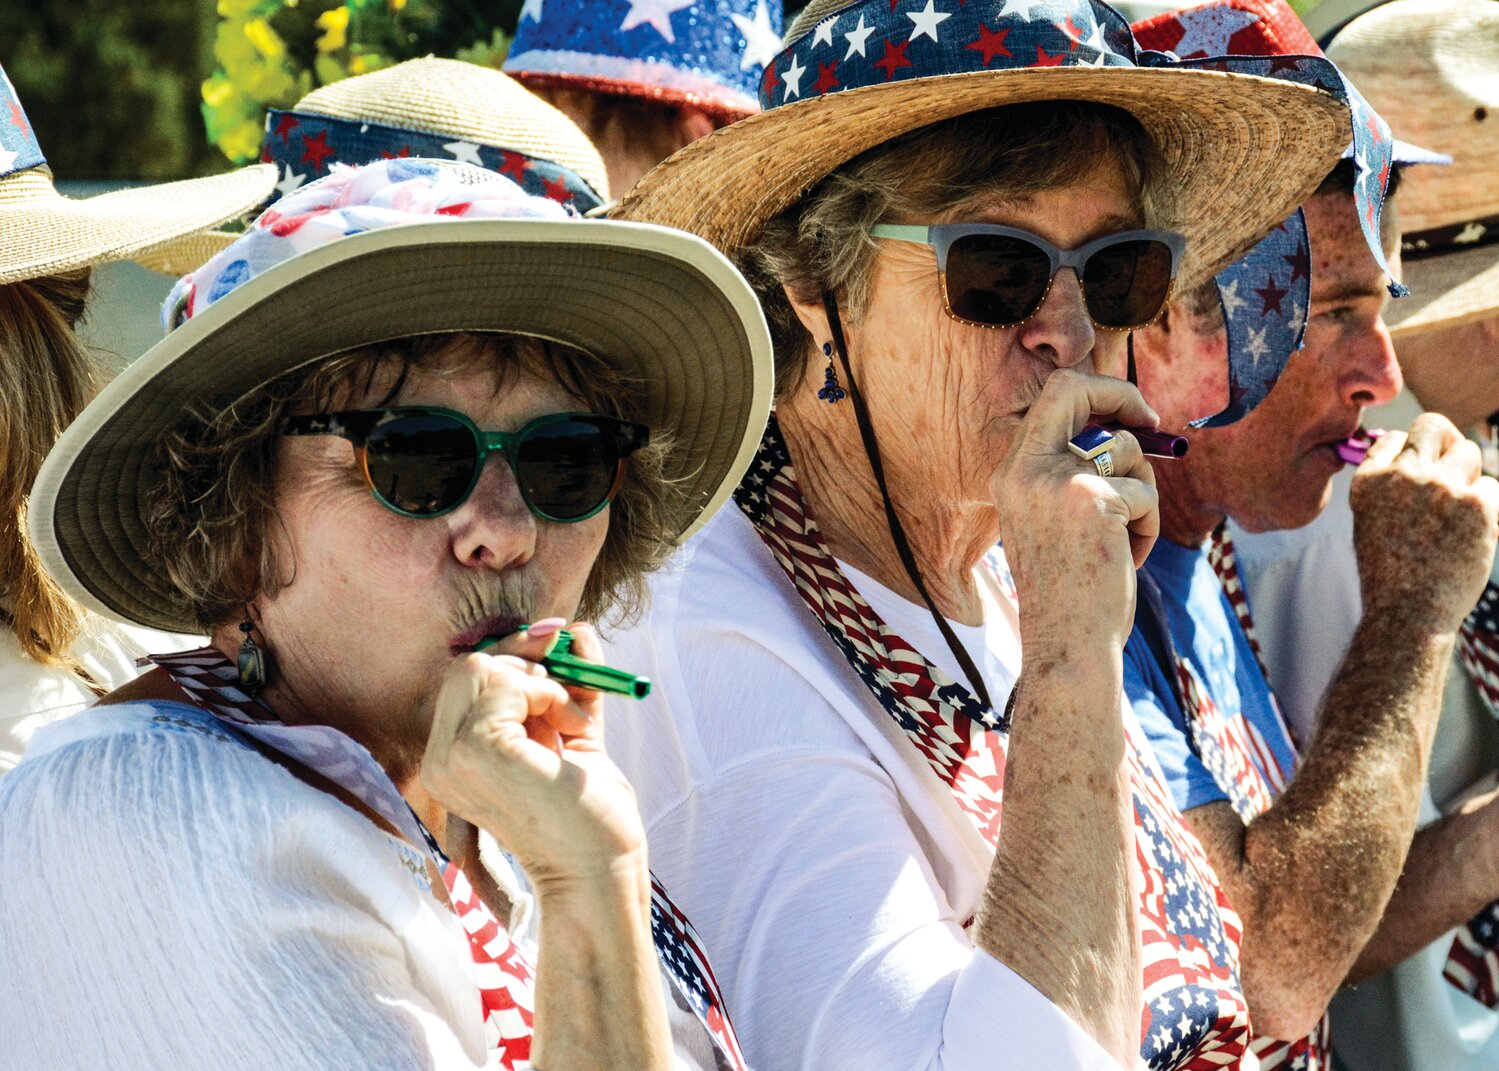 Claudia and Robert Moraga of Placitas came early and staked out a shady spot to watch the Fourth of July parade.